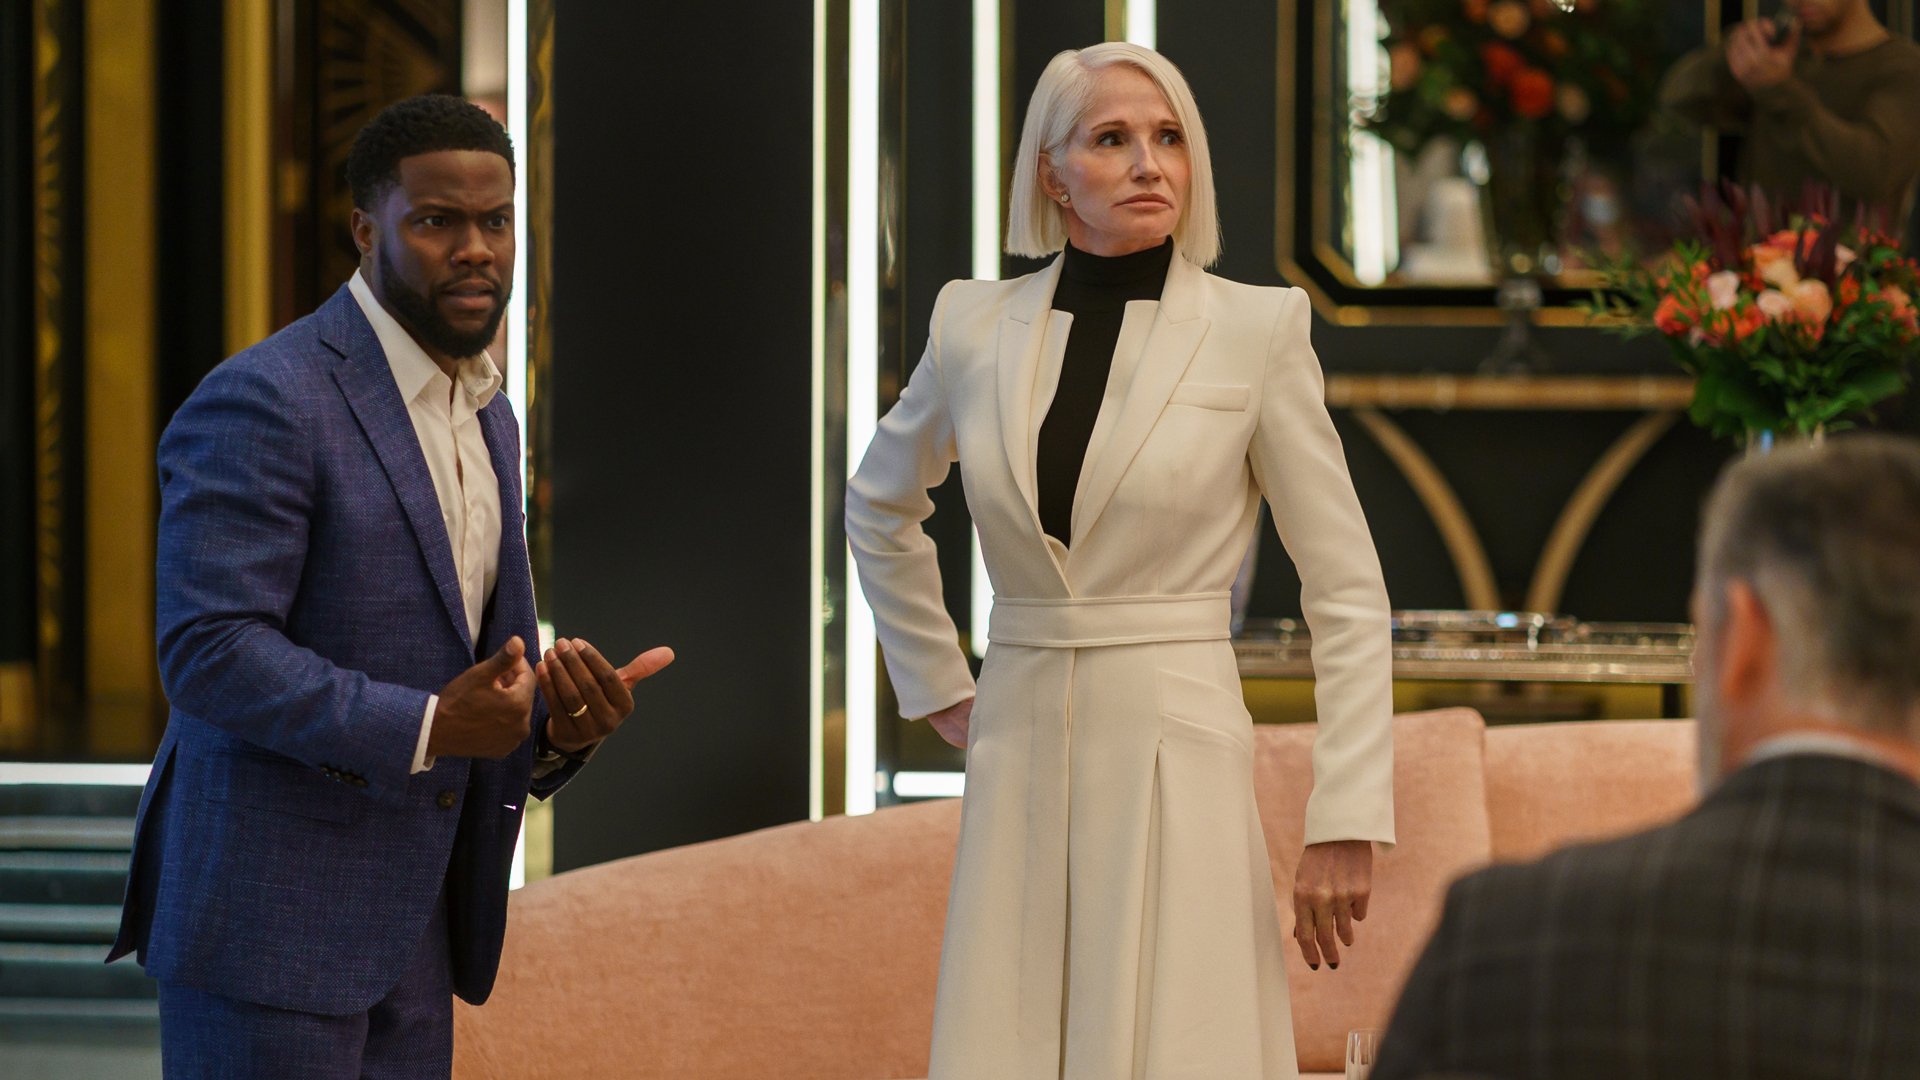 Two people in suits stand looking worried in a posh living room.